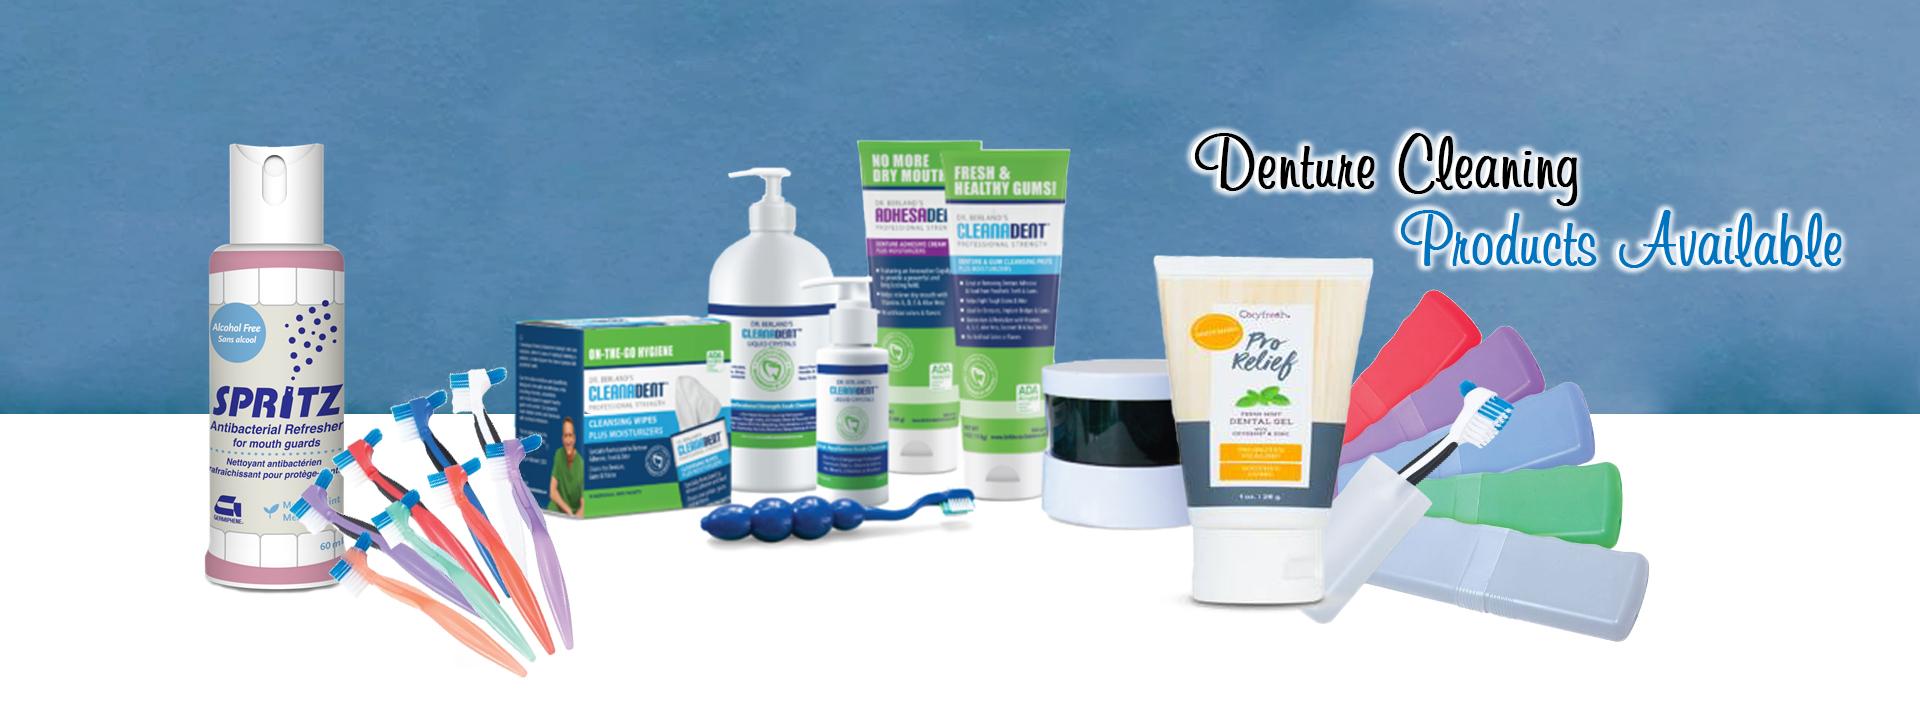 Denture Cleaning Products Available